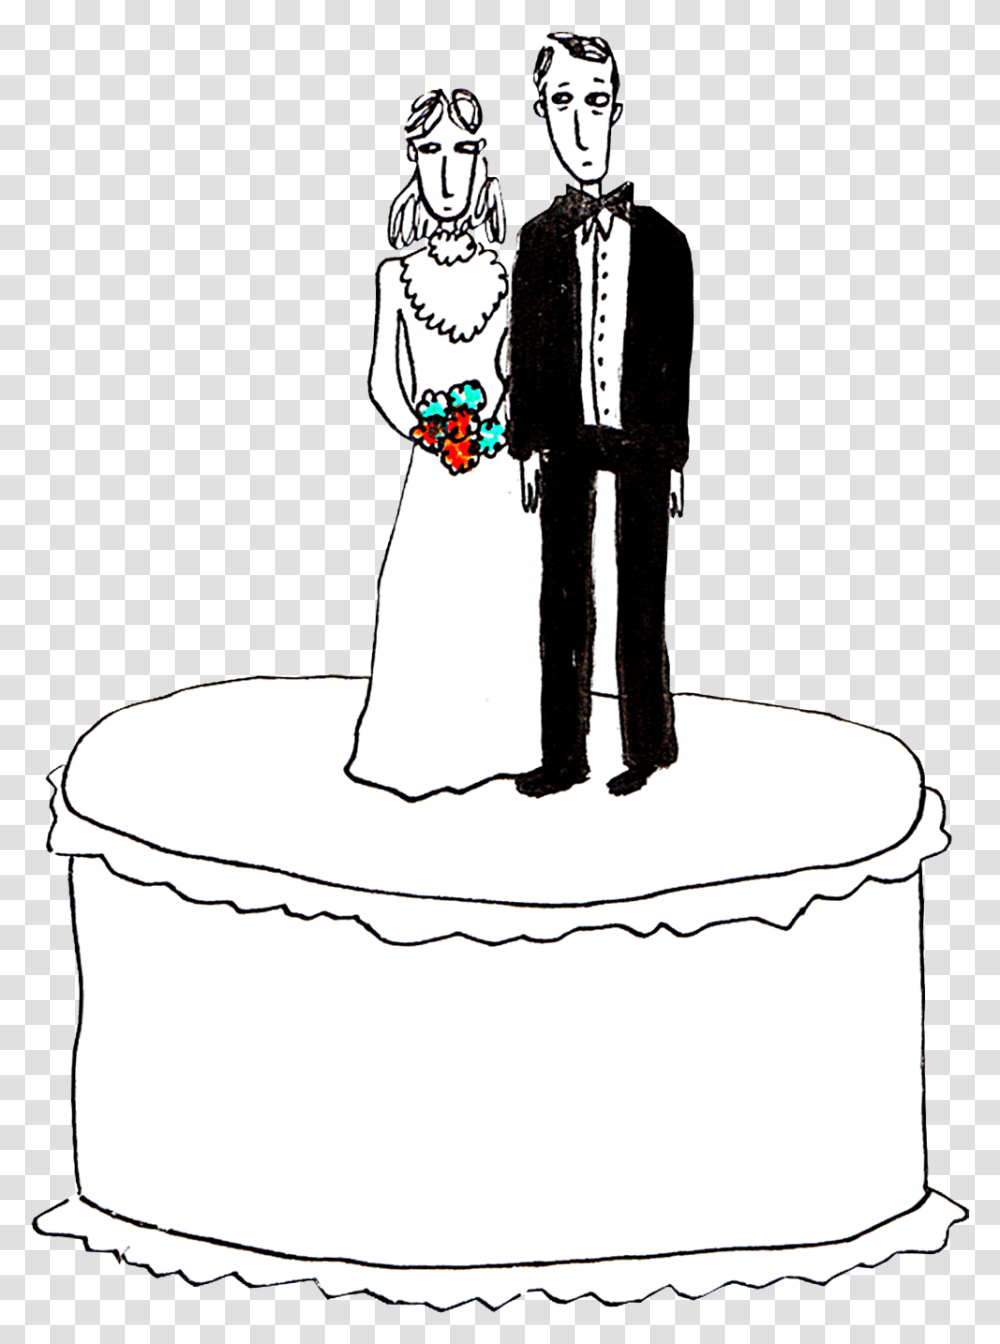 Married Couple Image Society Says Cartoon, Person, Cake, Dessert, Food Transparent Png